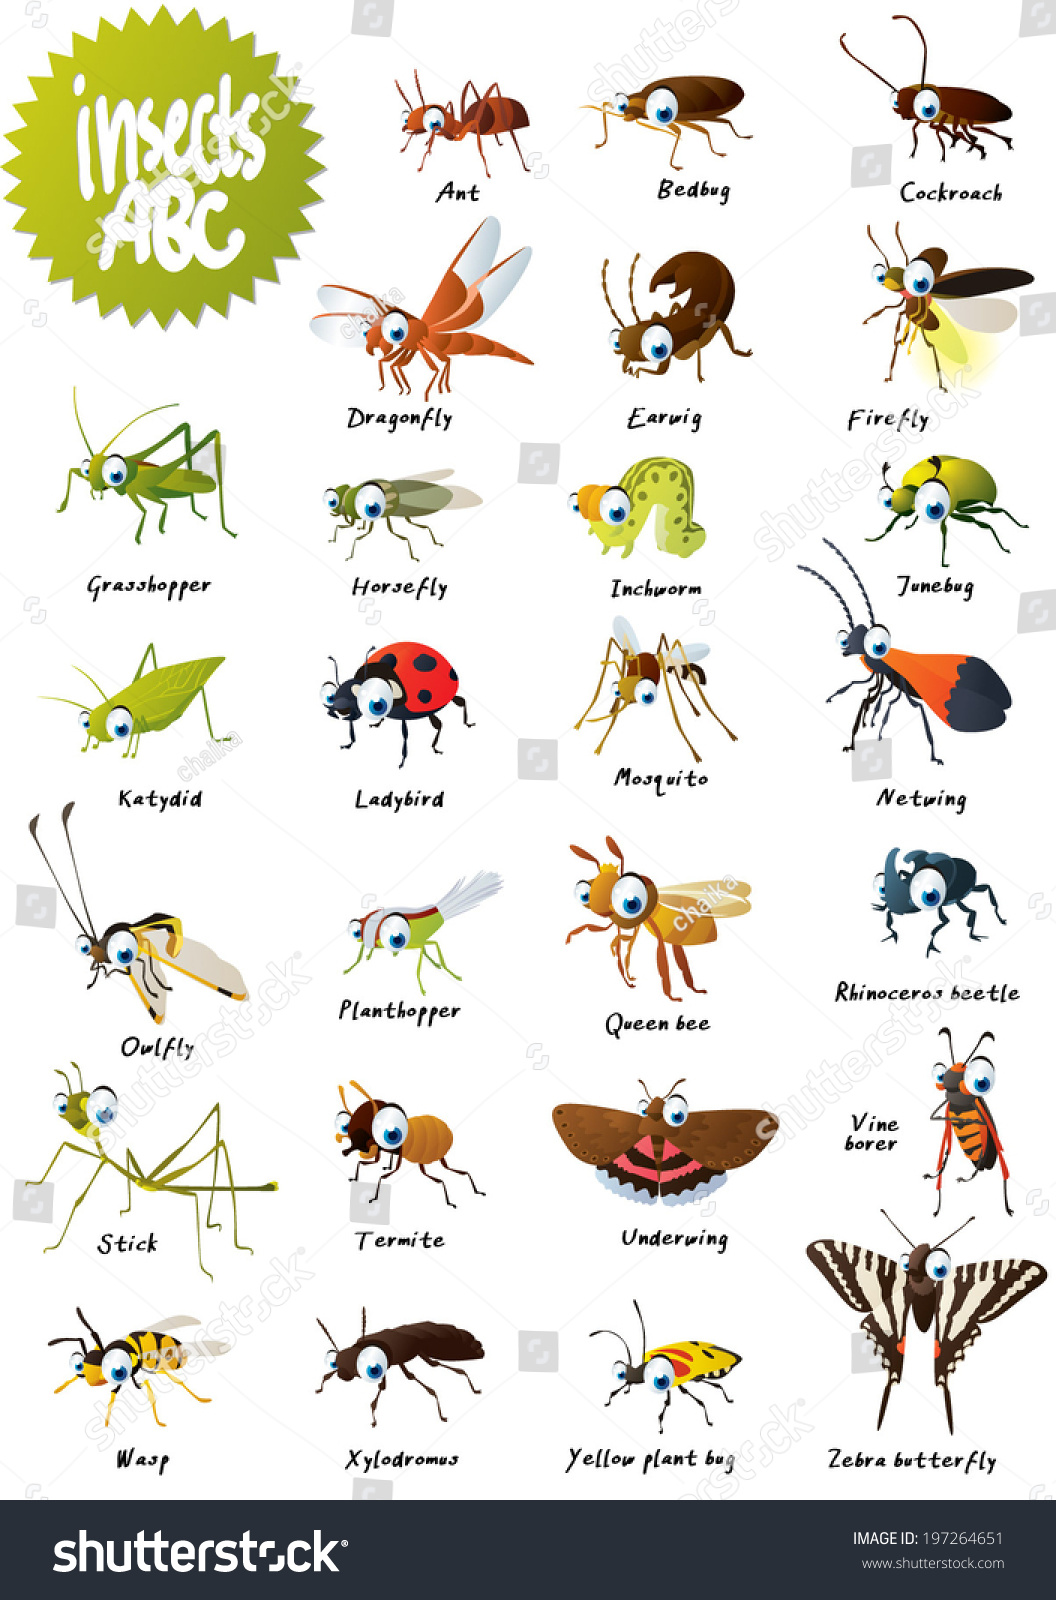 Insects Abc Stock Vector 197264651 : Shutterstock